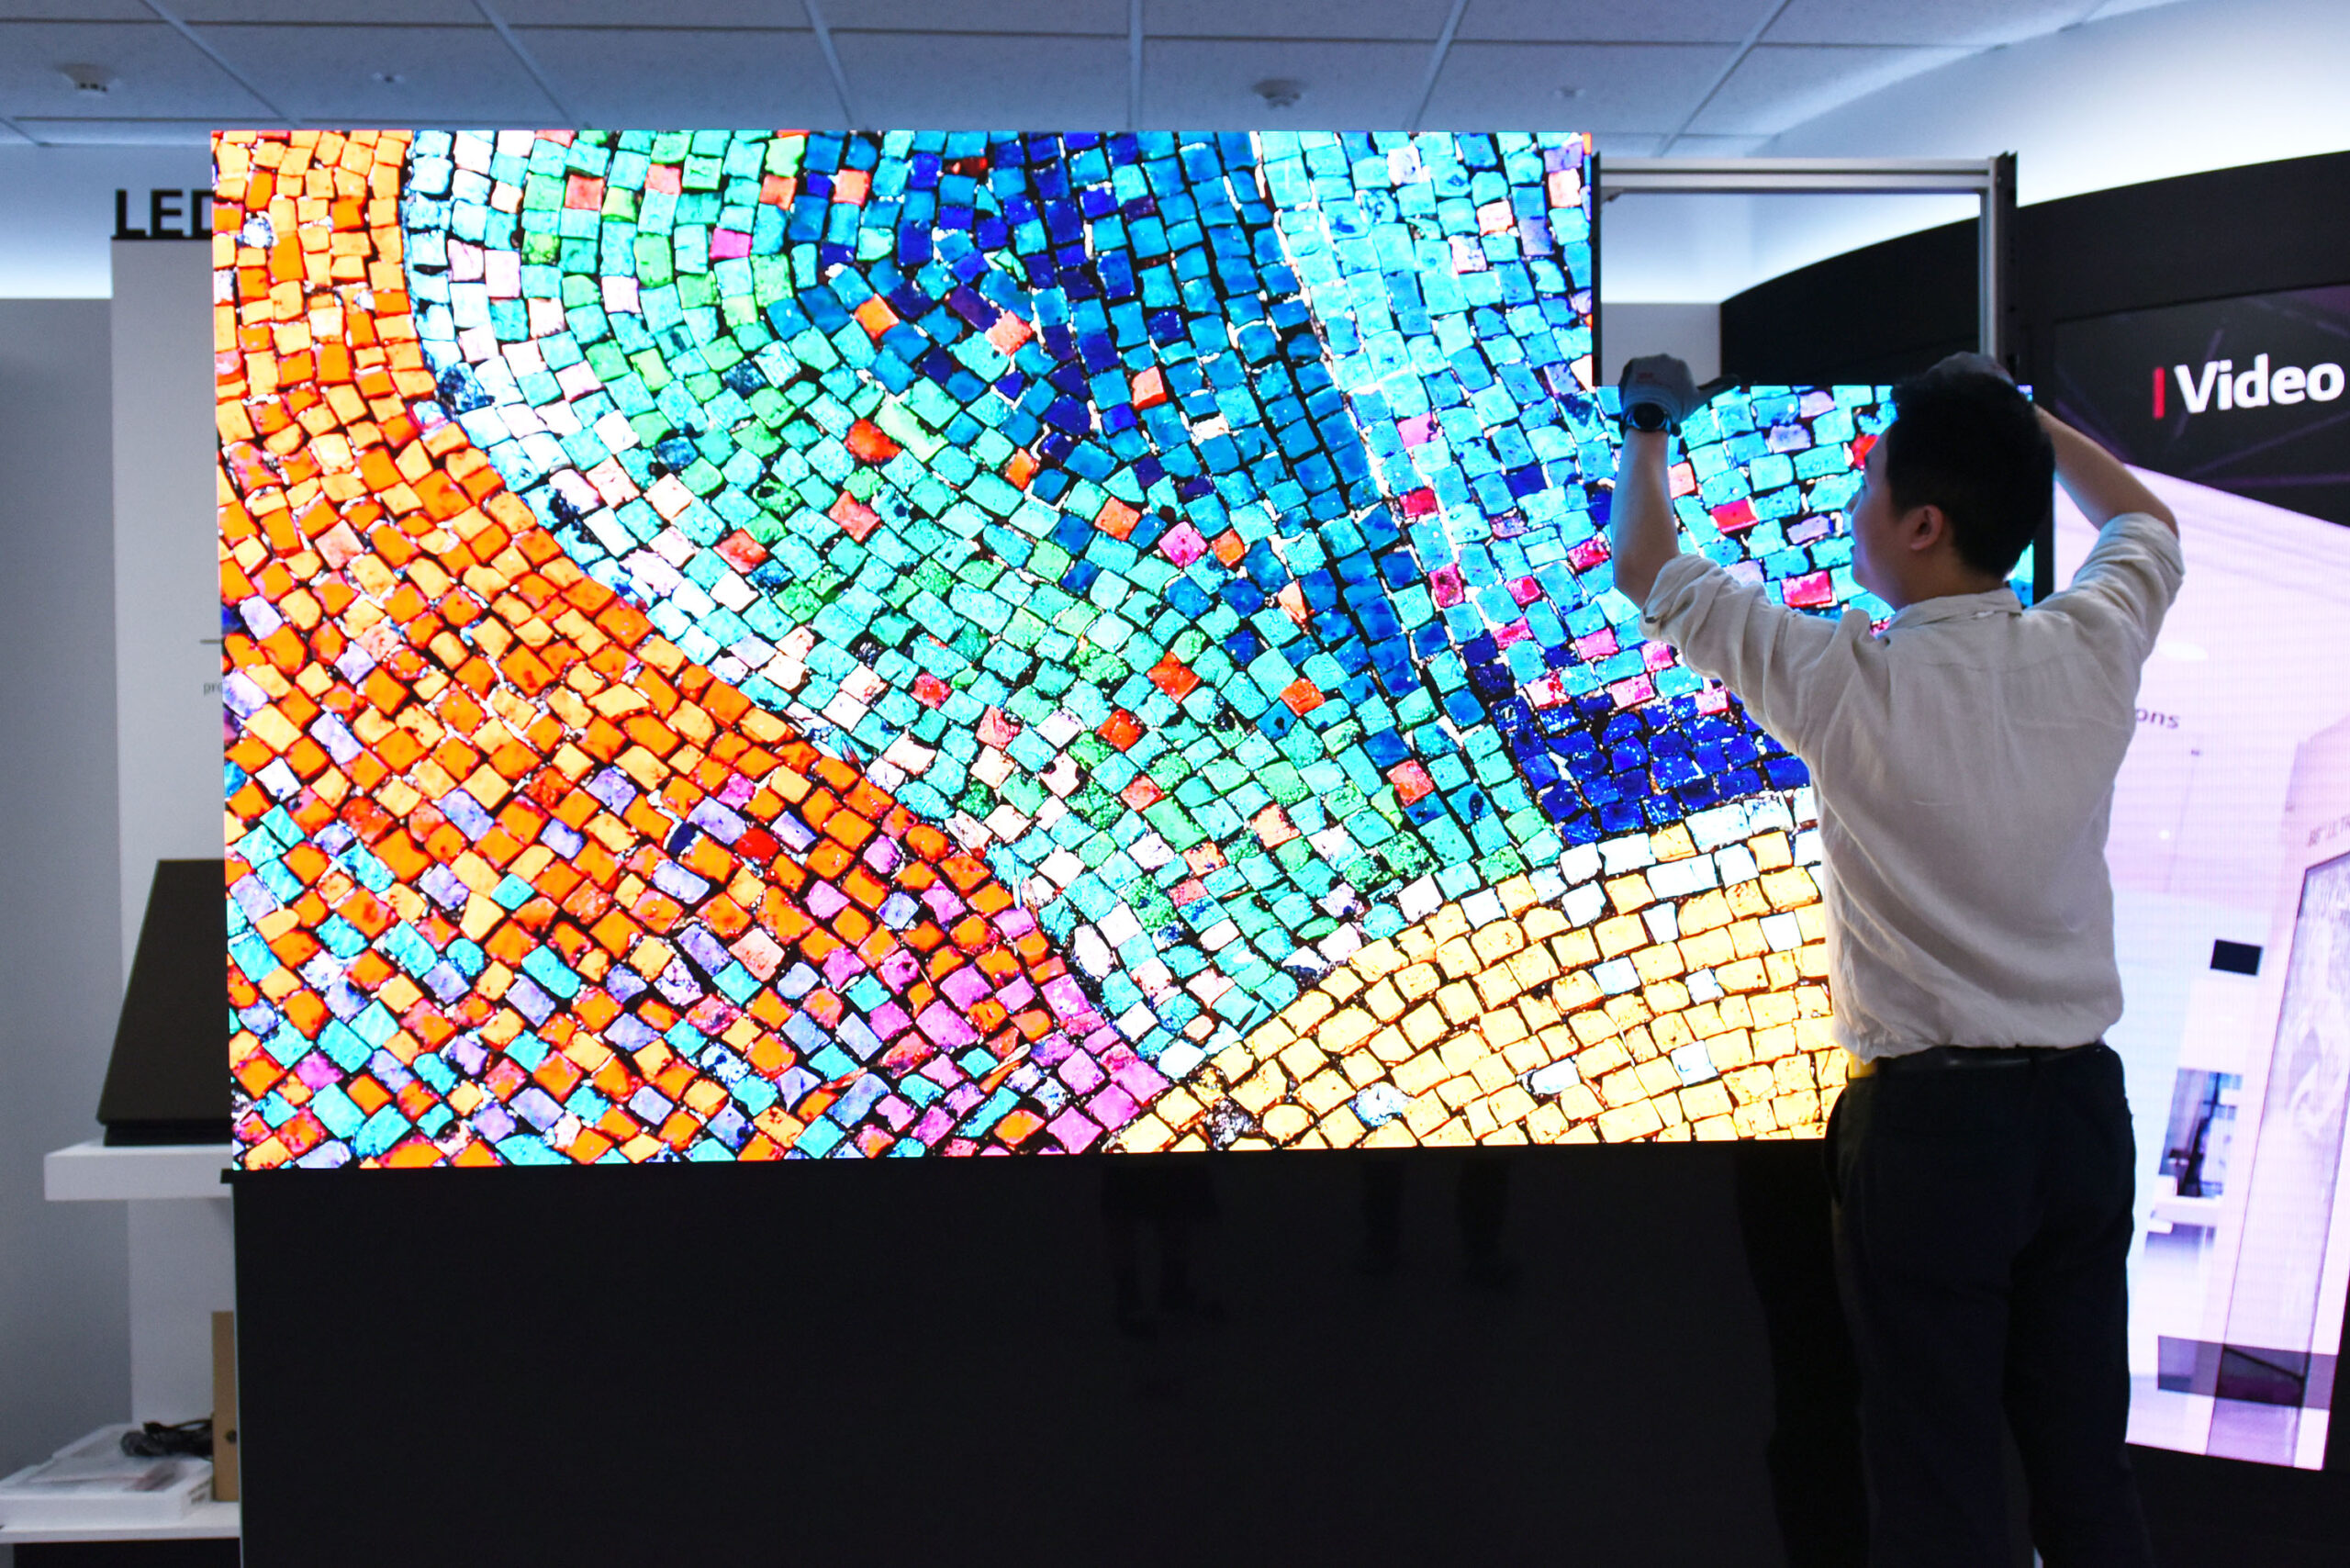 A man installing the LG LED Signage (LSAA) demonstrates how perfectly and easily each panel fits together to make a vibrant, high-quality large display